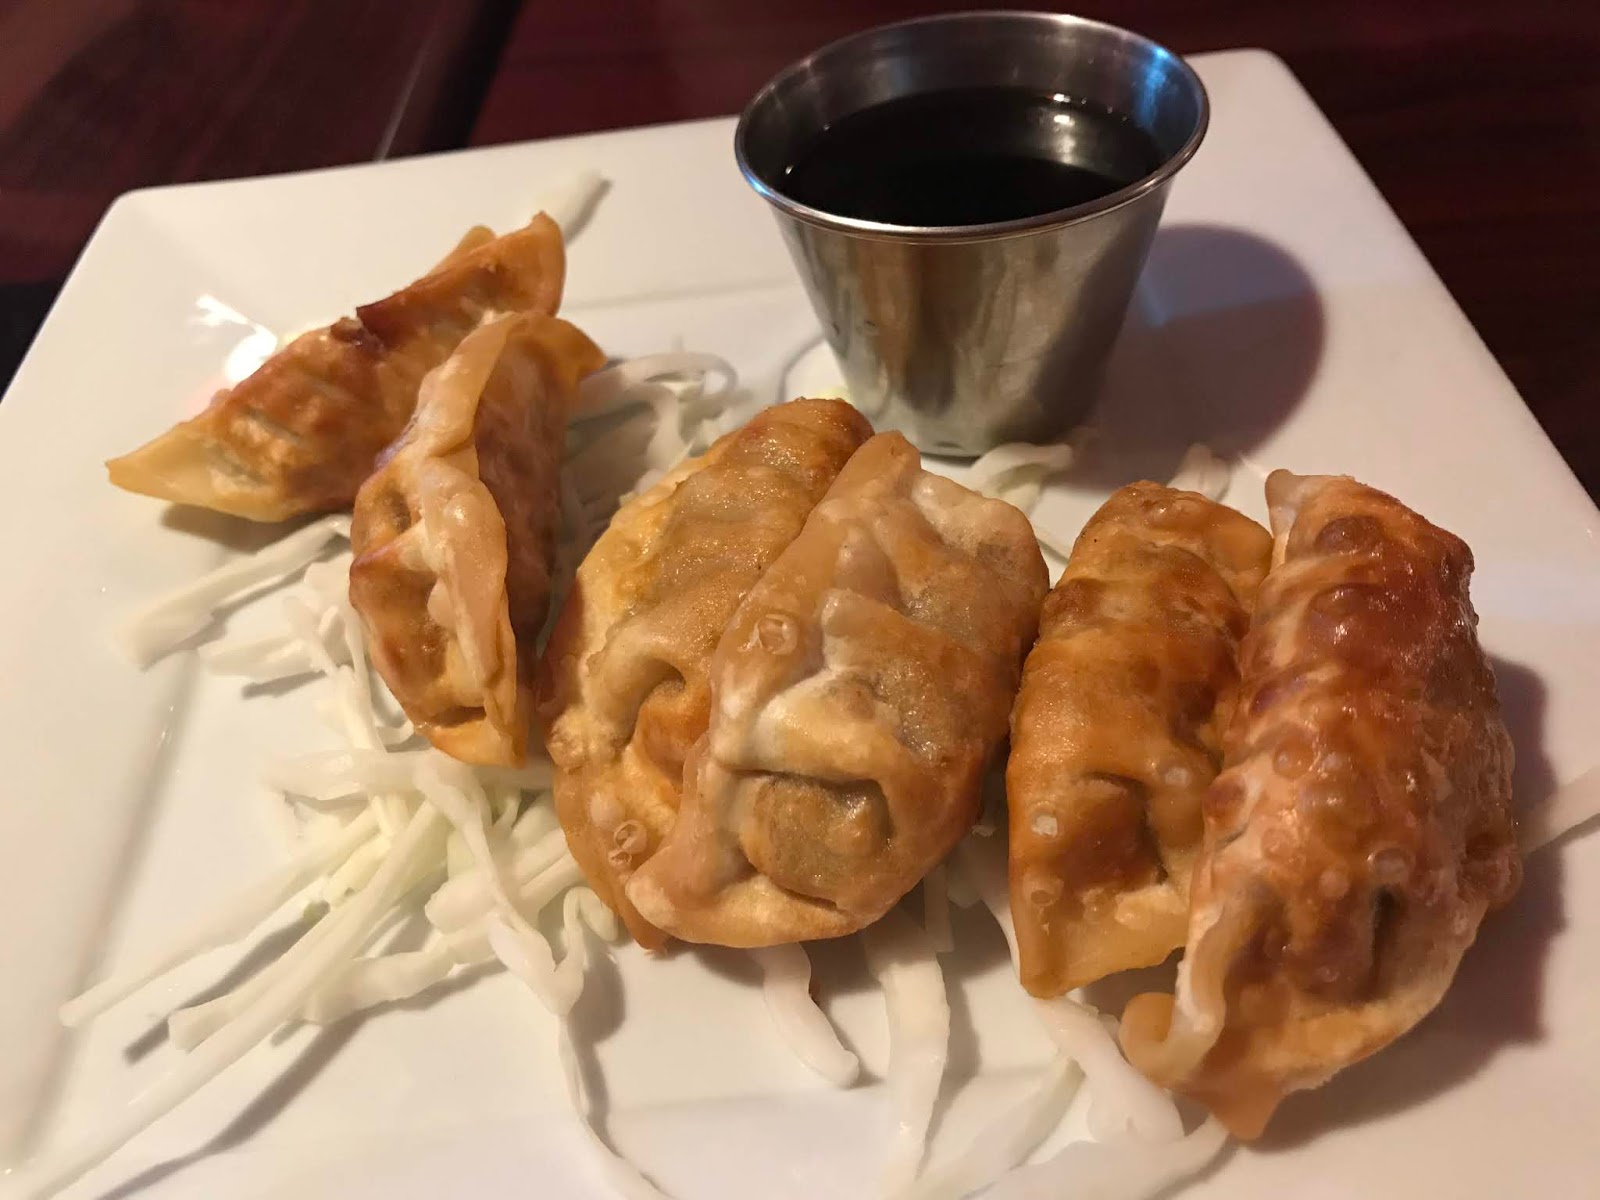 The Pastry Chef's Baking: Restaurant Review: Thai Spice, Kansas City (Lee's  Summit), MO